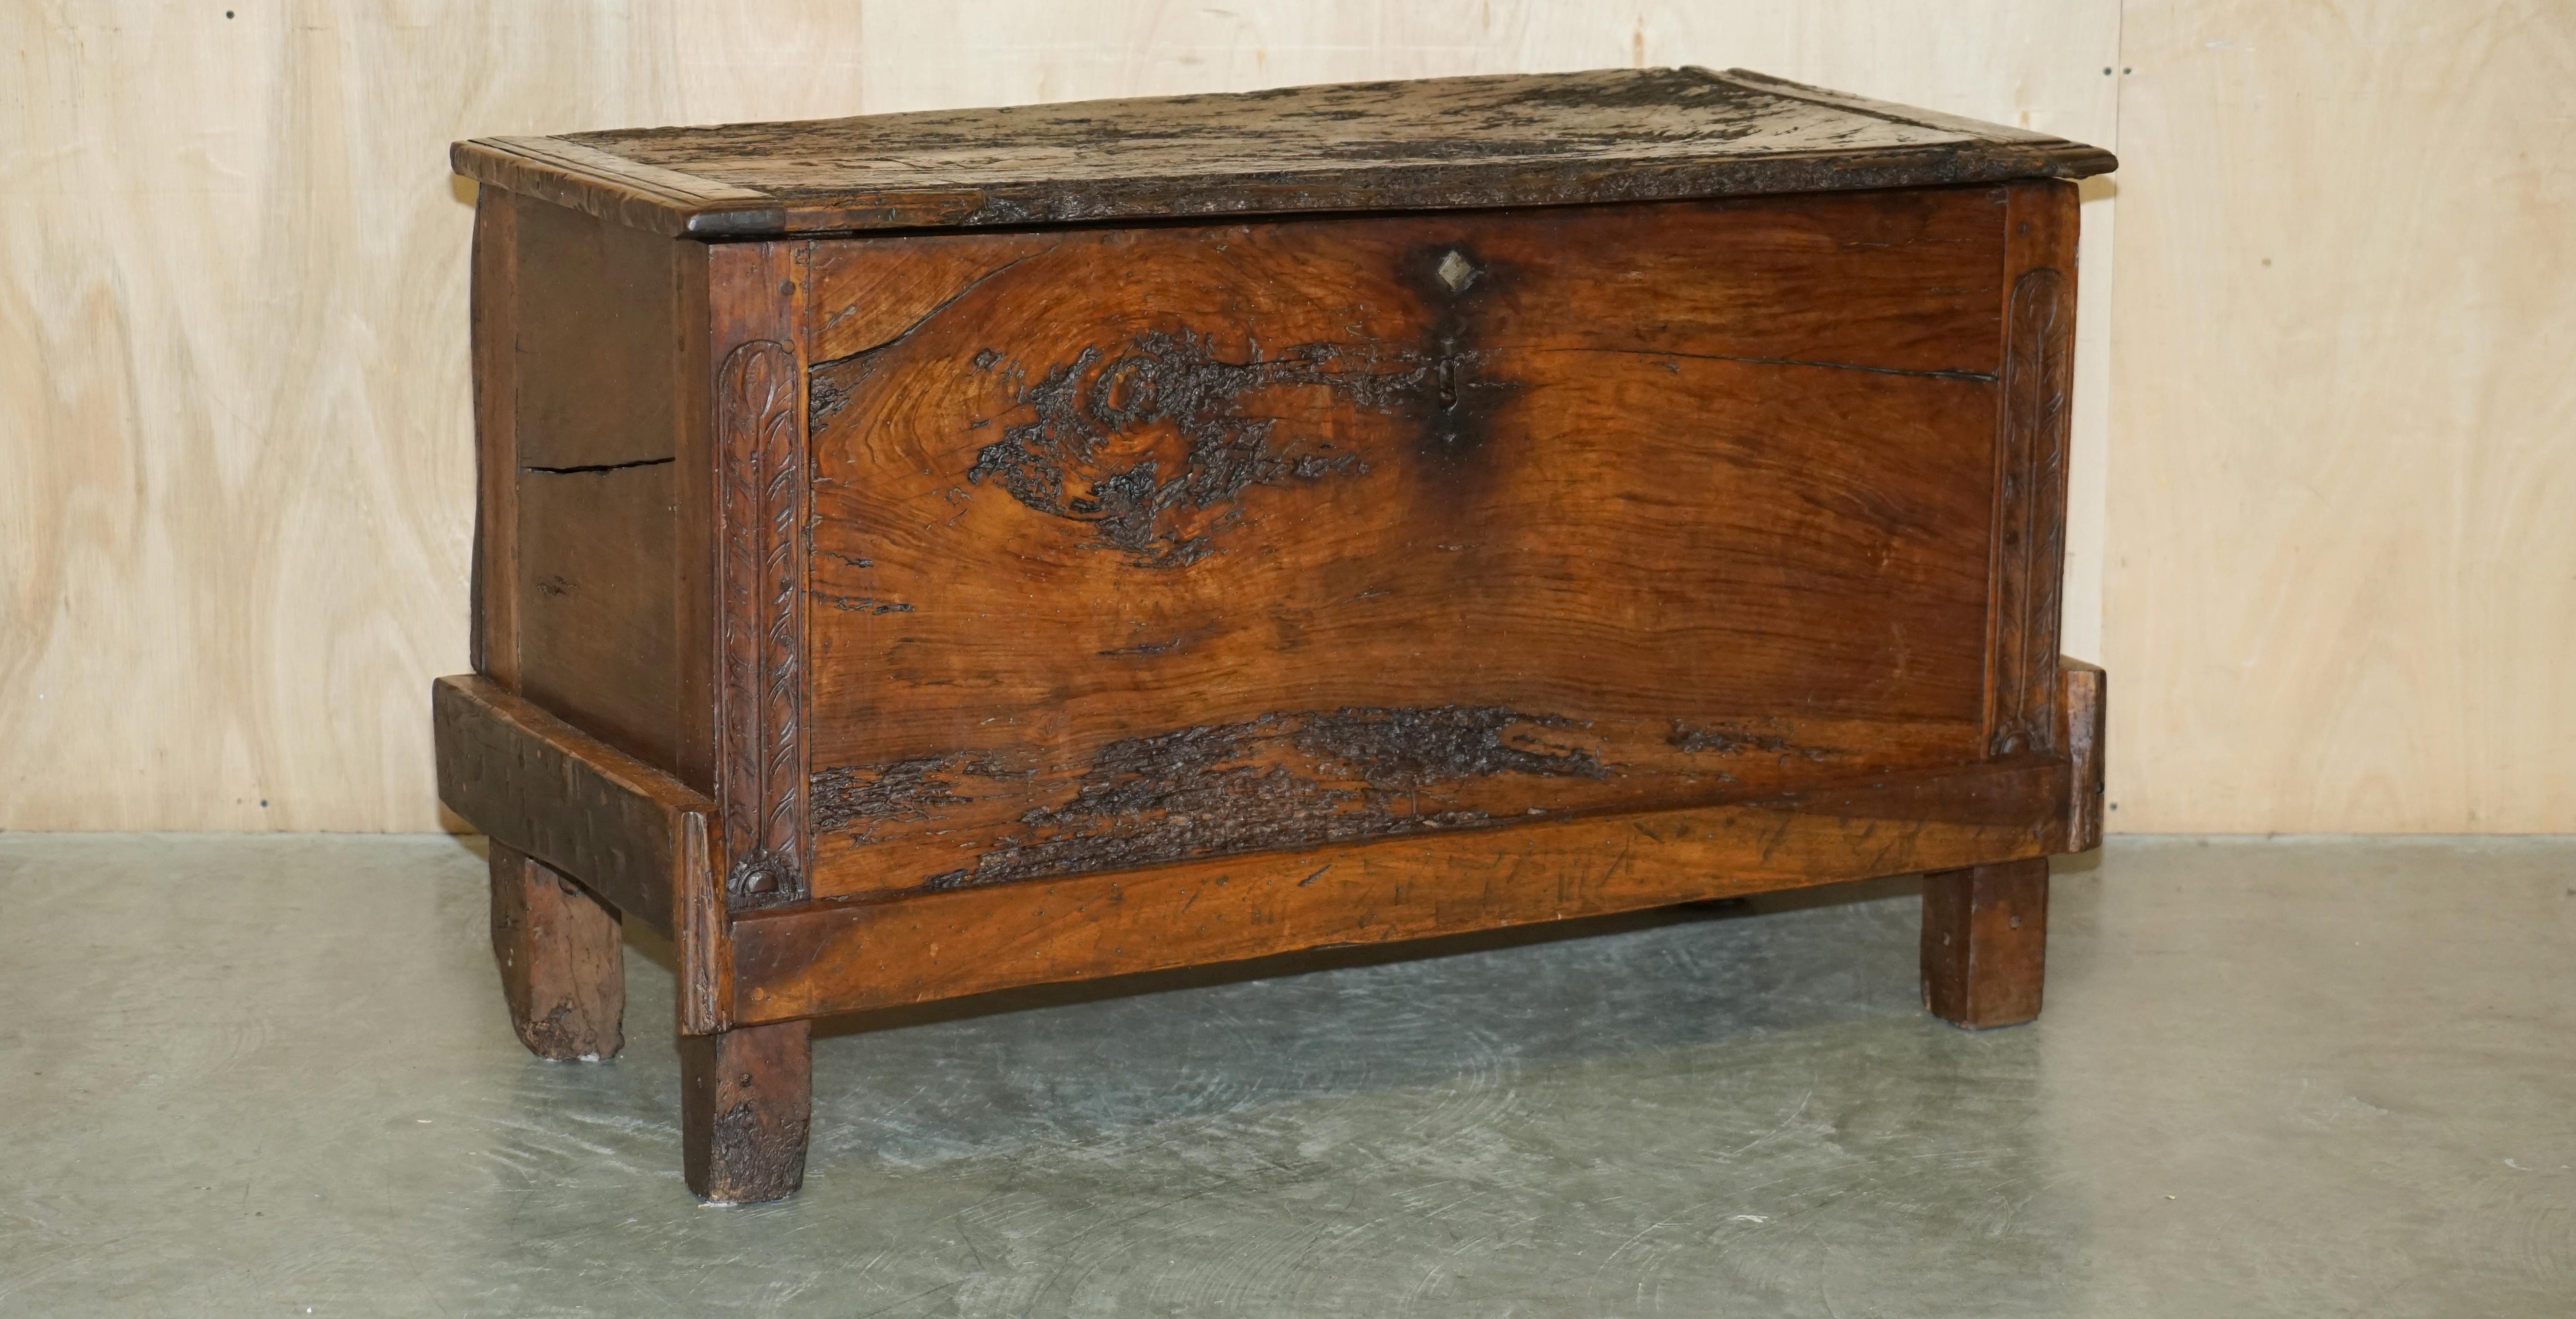 Royal House Antiques

Royal House Antiques is delighted to offer for sale this super rare, highly collectable, large English circa 1760, heavily Burred Chestnut six plank chest or trunk 

Please note the delivery fee listed is just a guide, it